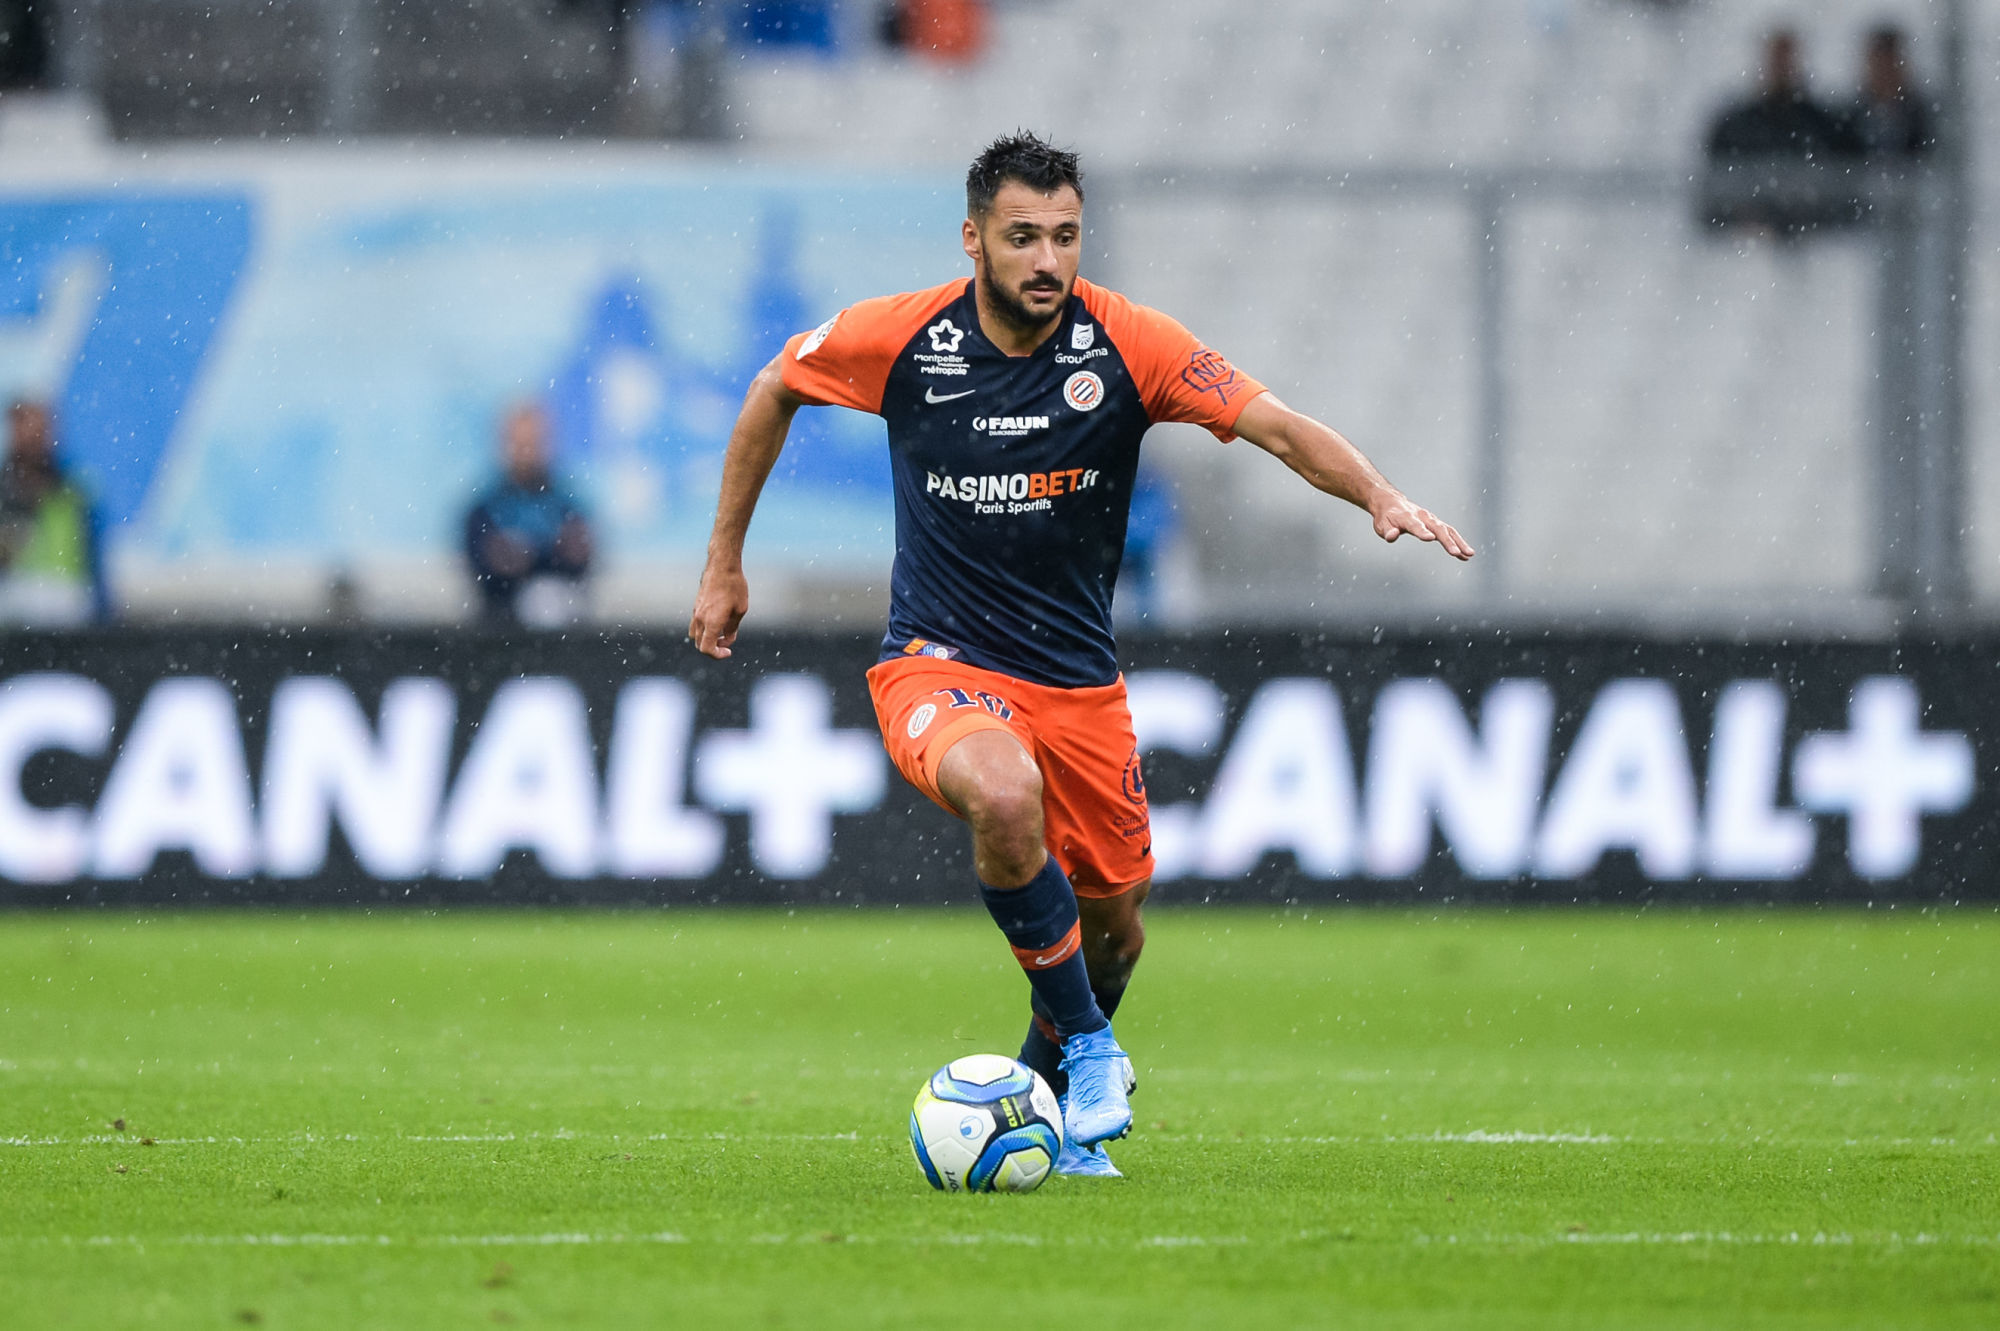 Gaetan LABORDE of Montpellier during the French Ligue 1 football match between Marseille and Montpellier on September 21, 2019 in Marseille, France. (Photo by Baptiste Fernandez/Icon Sport) - Gaetan LABORDE - Orange Vélodrome - Marseille (France)